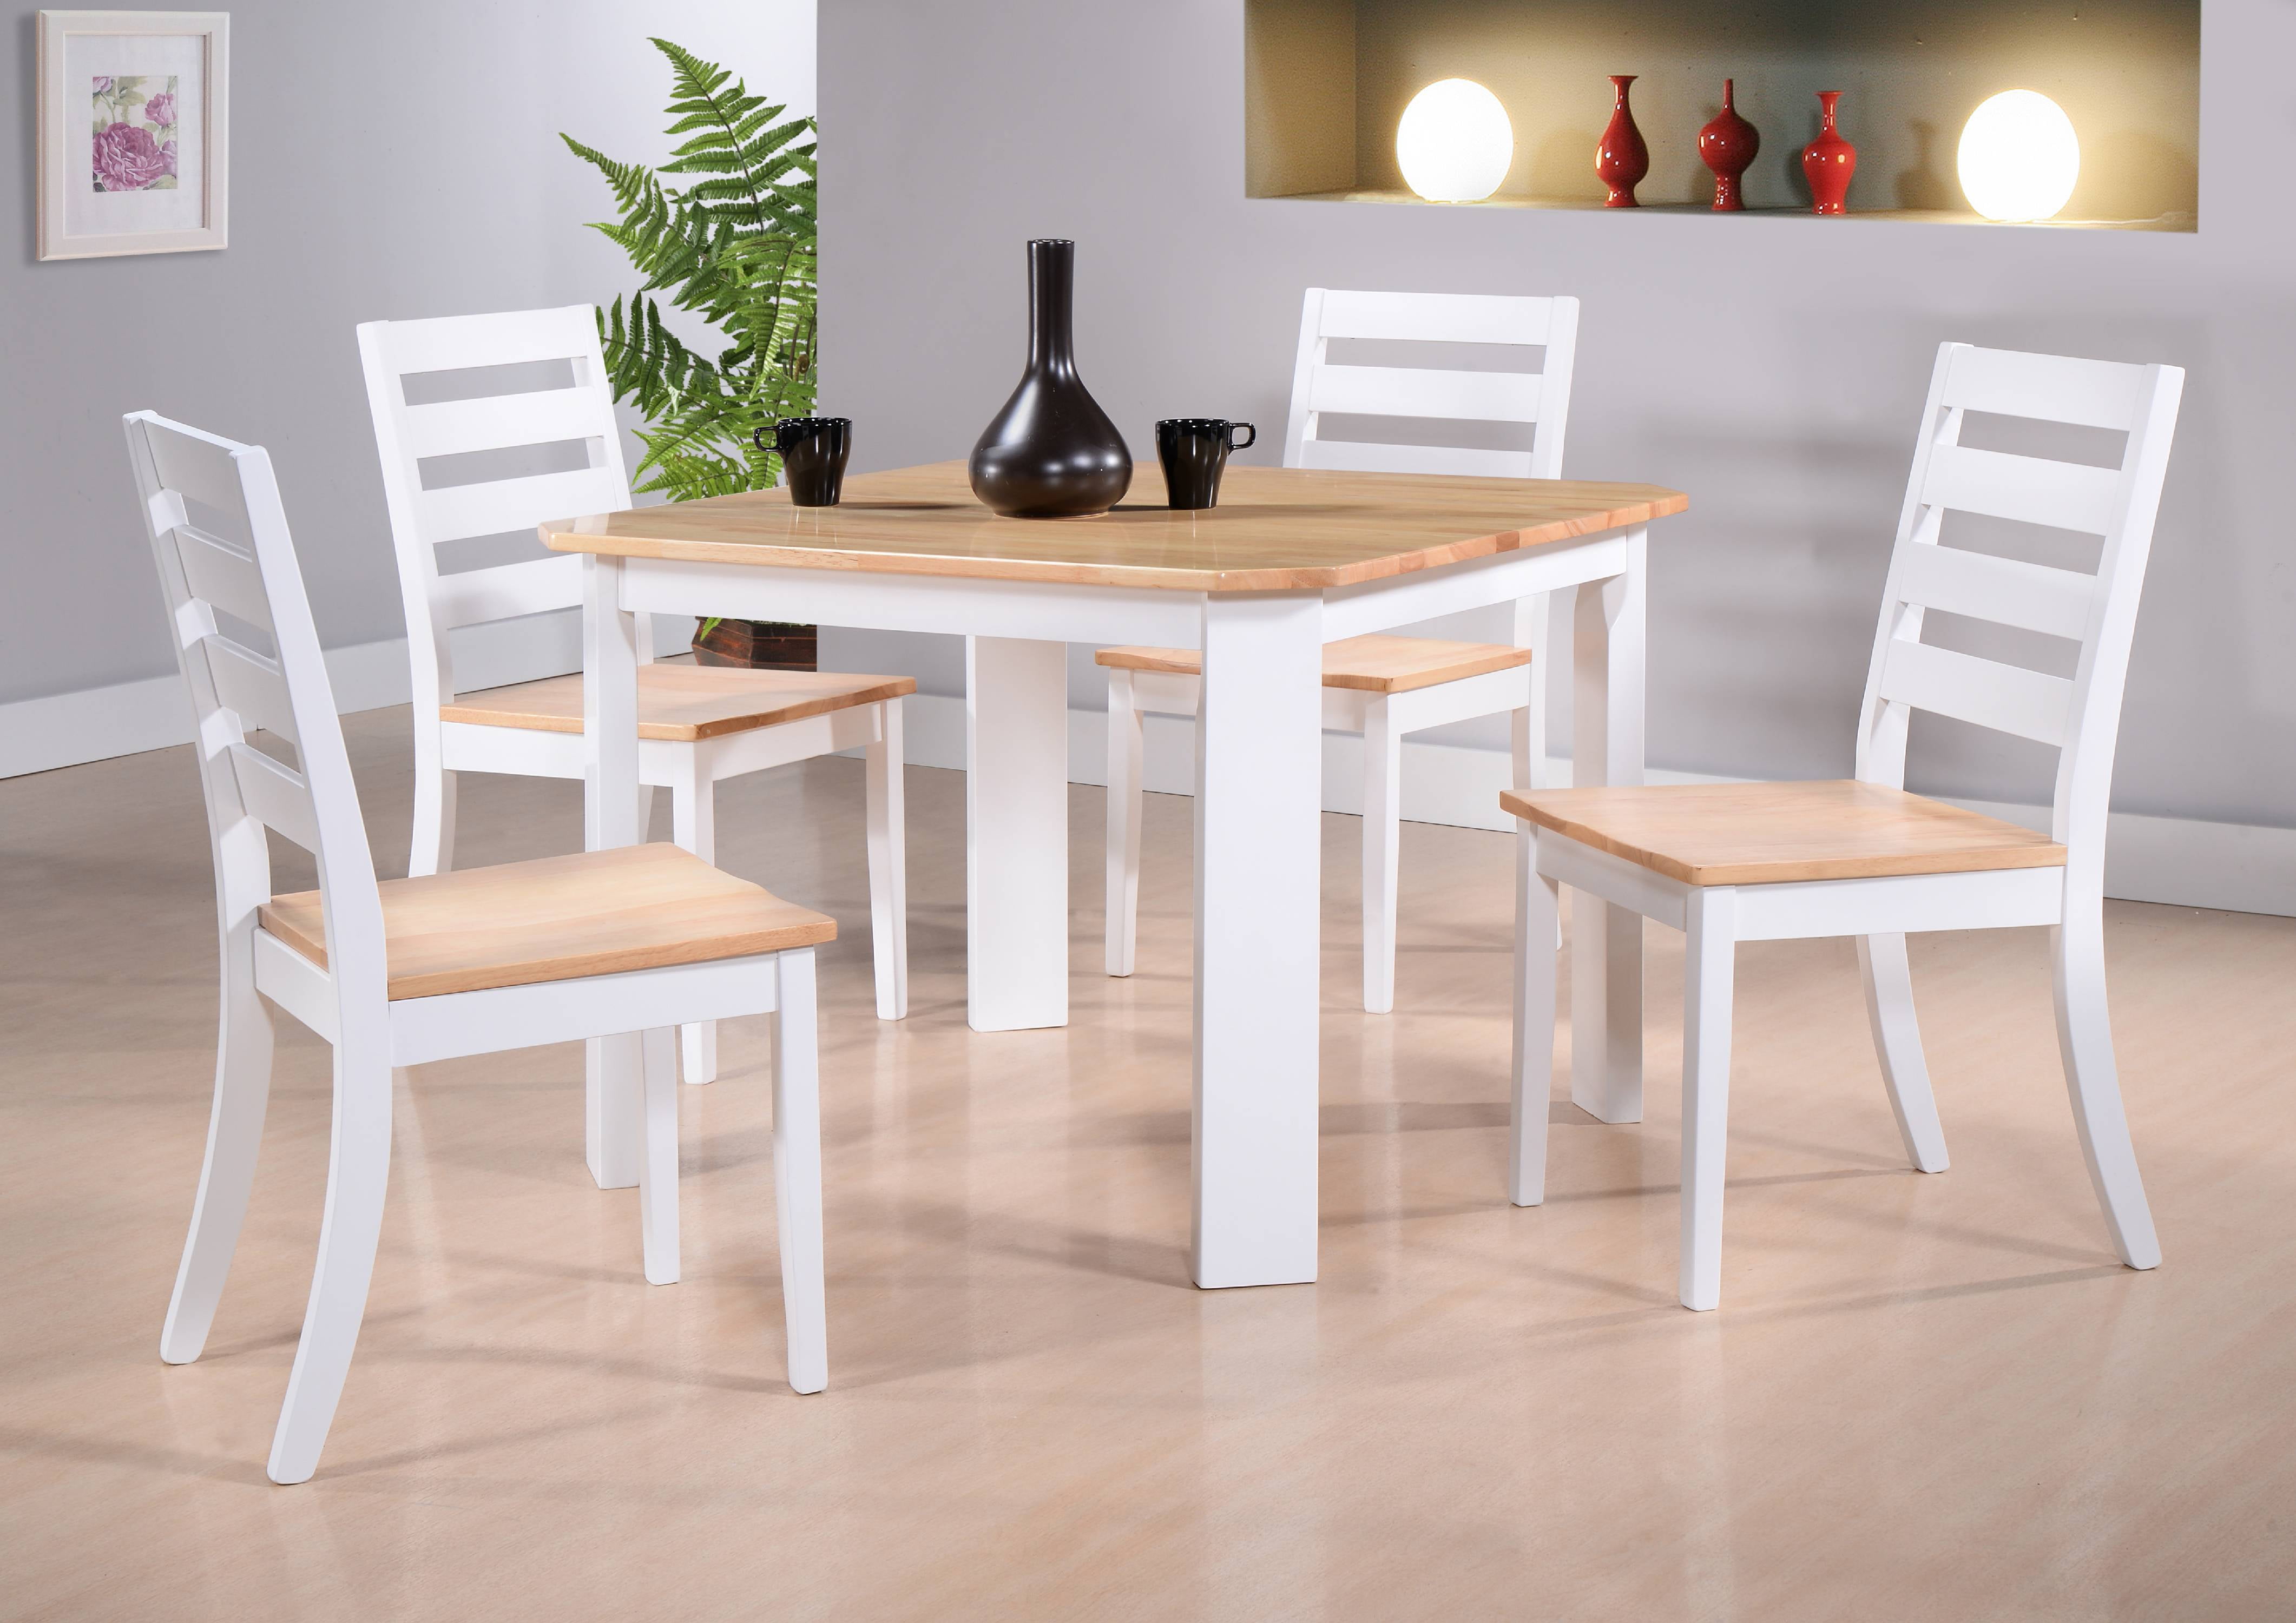 Wood Kitchen Tables And Chairs Sets Add A Unique Touch To Your Dining ...